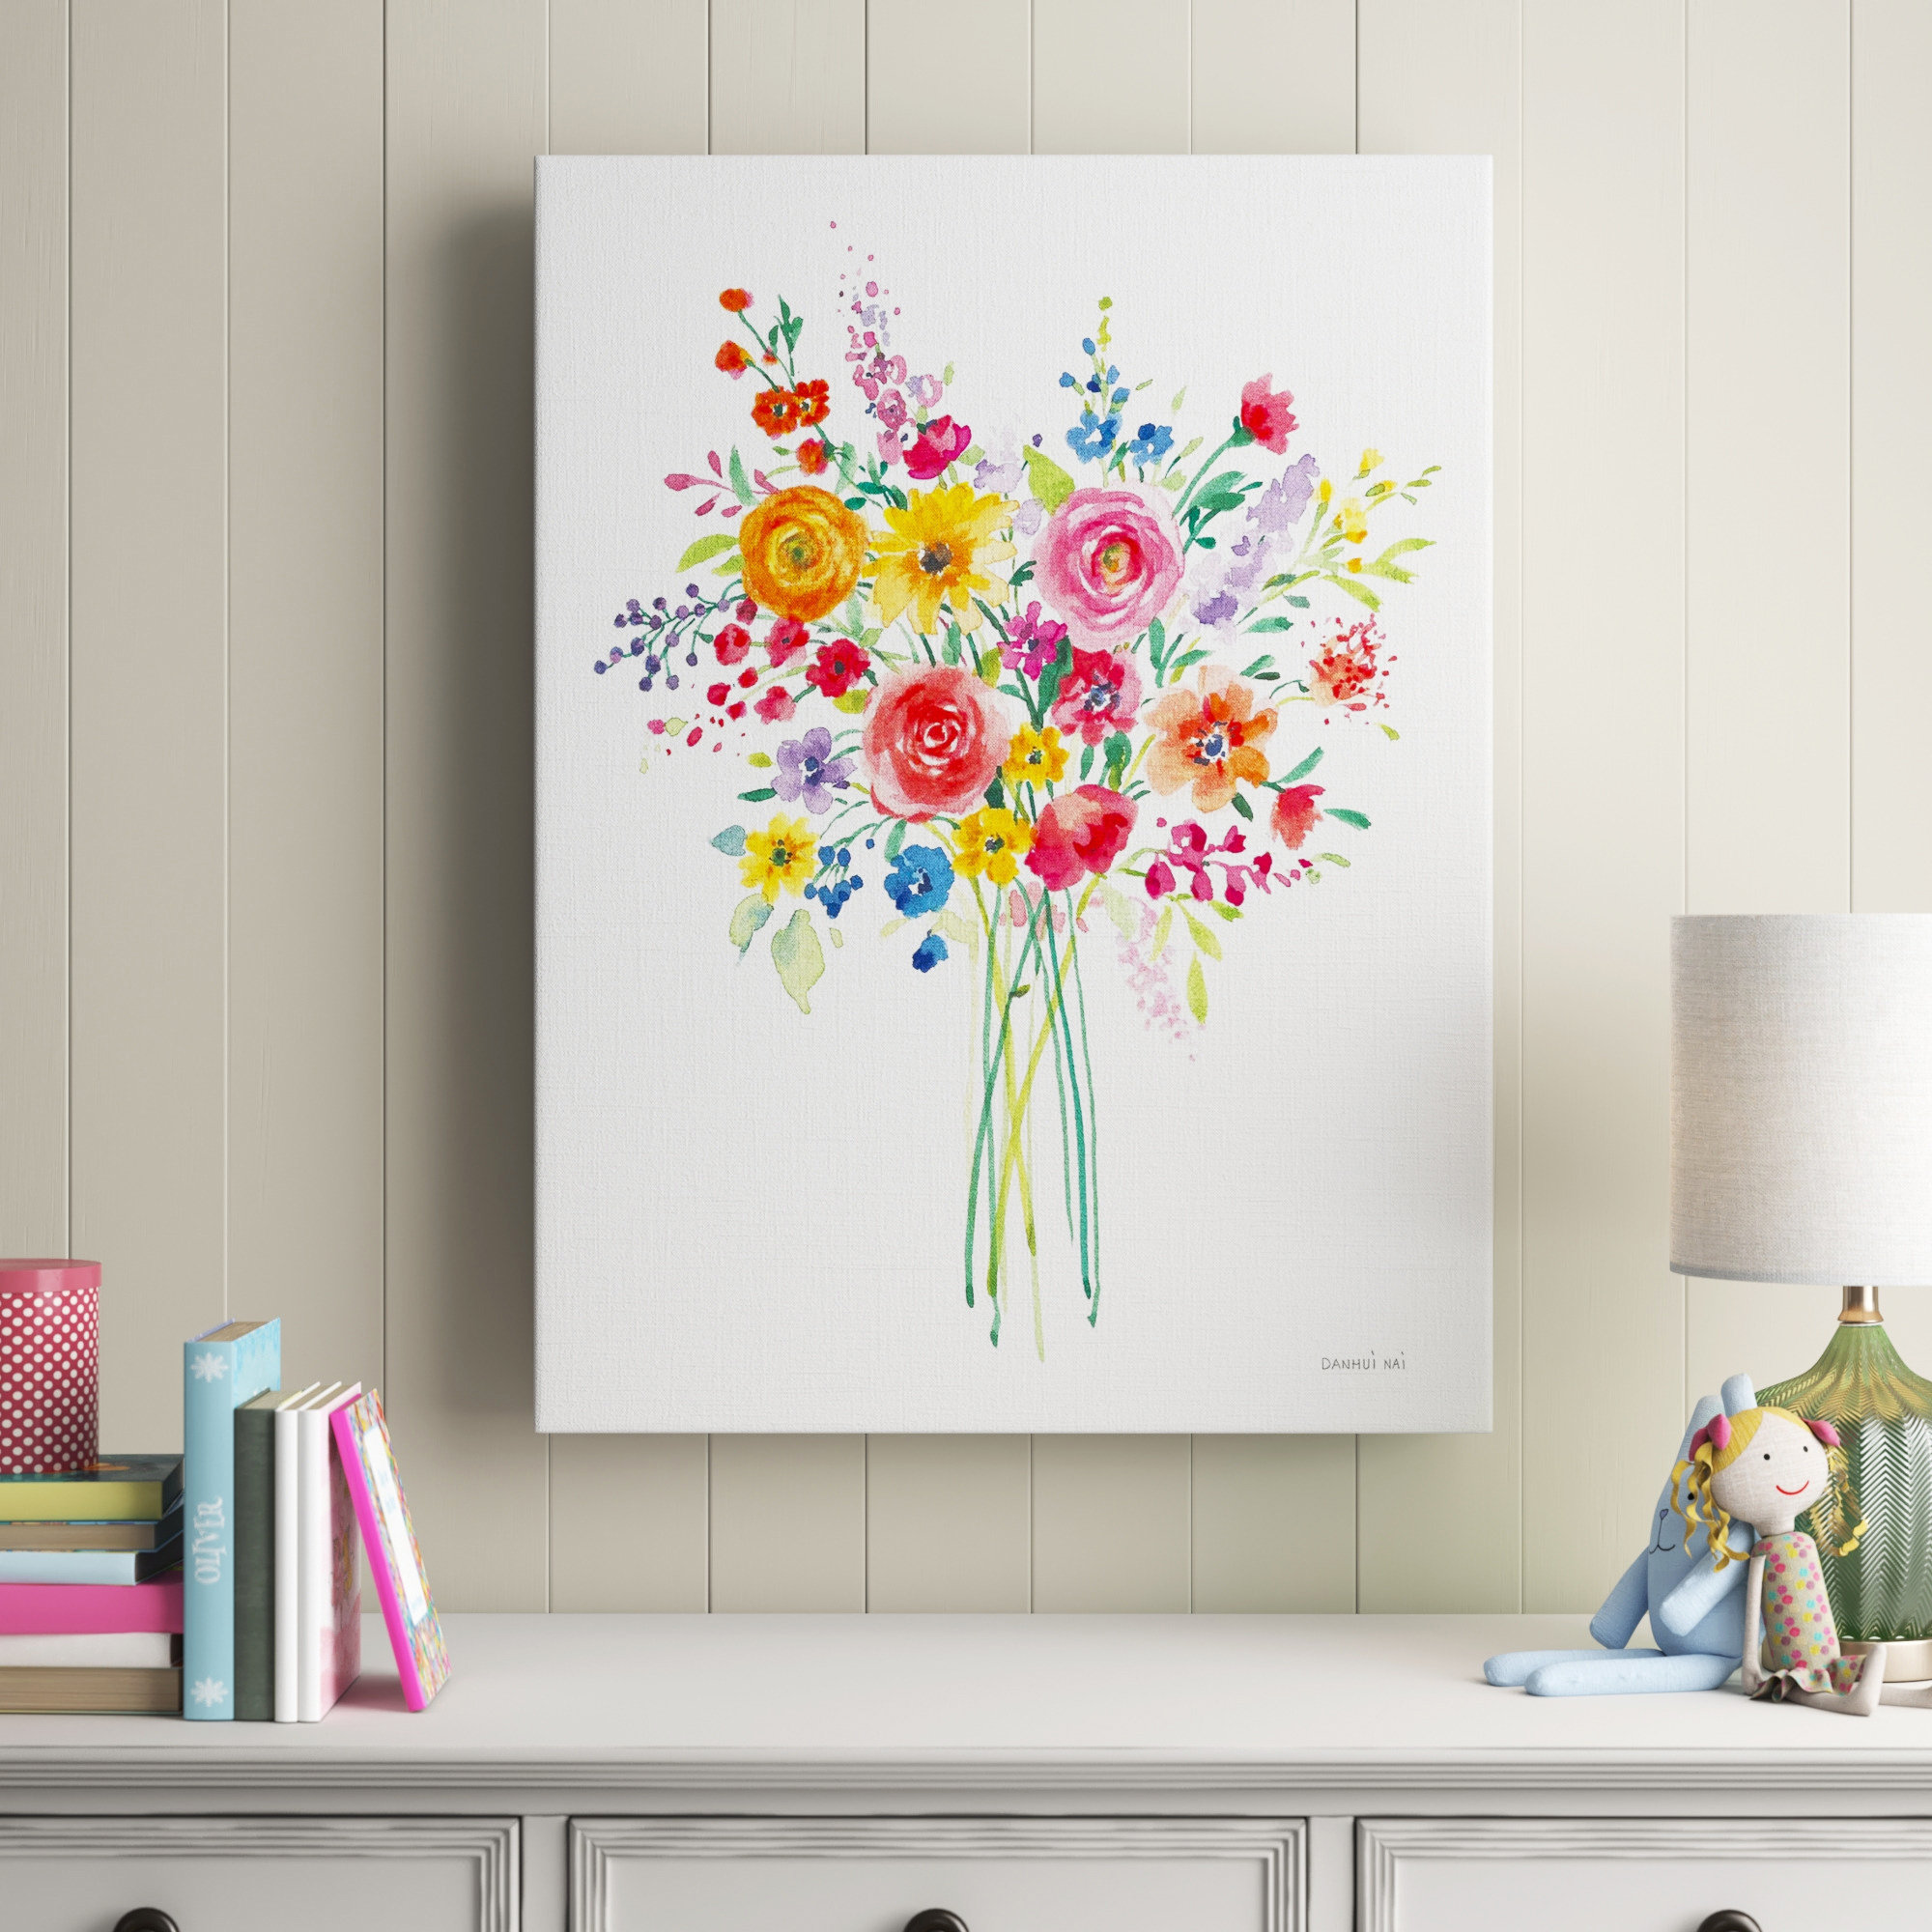 Sunshine Flowers - Painting Print on Canvas Sand & Stable Baby & Kids Format: Wrapped Canvas, Size: 32 H x 24 W x 2 D